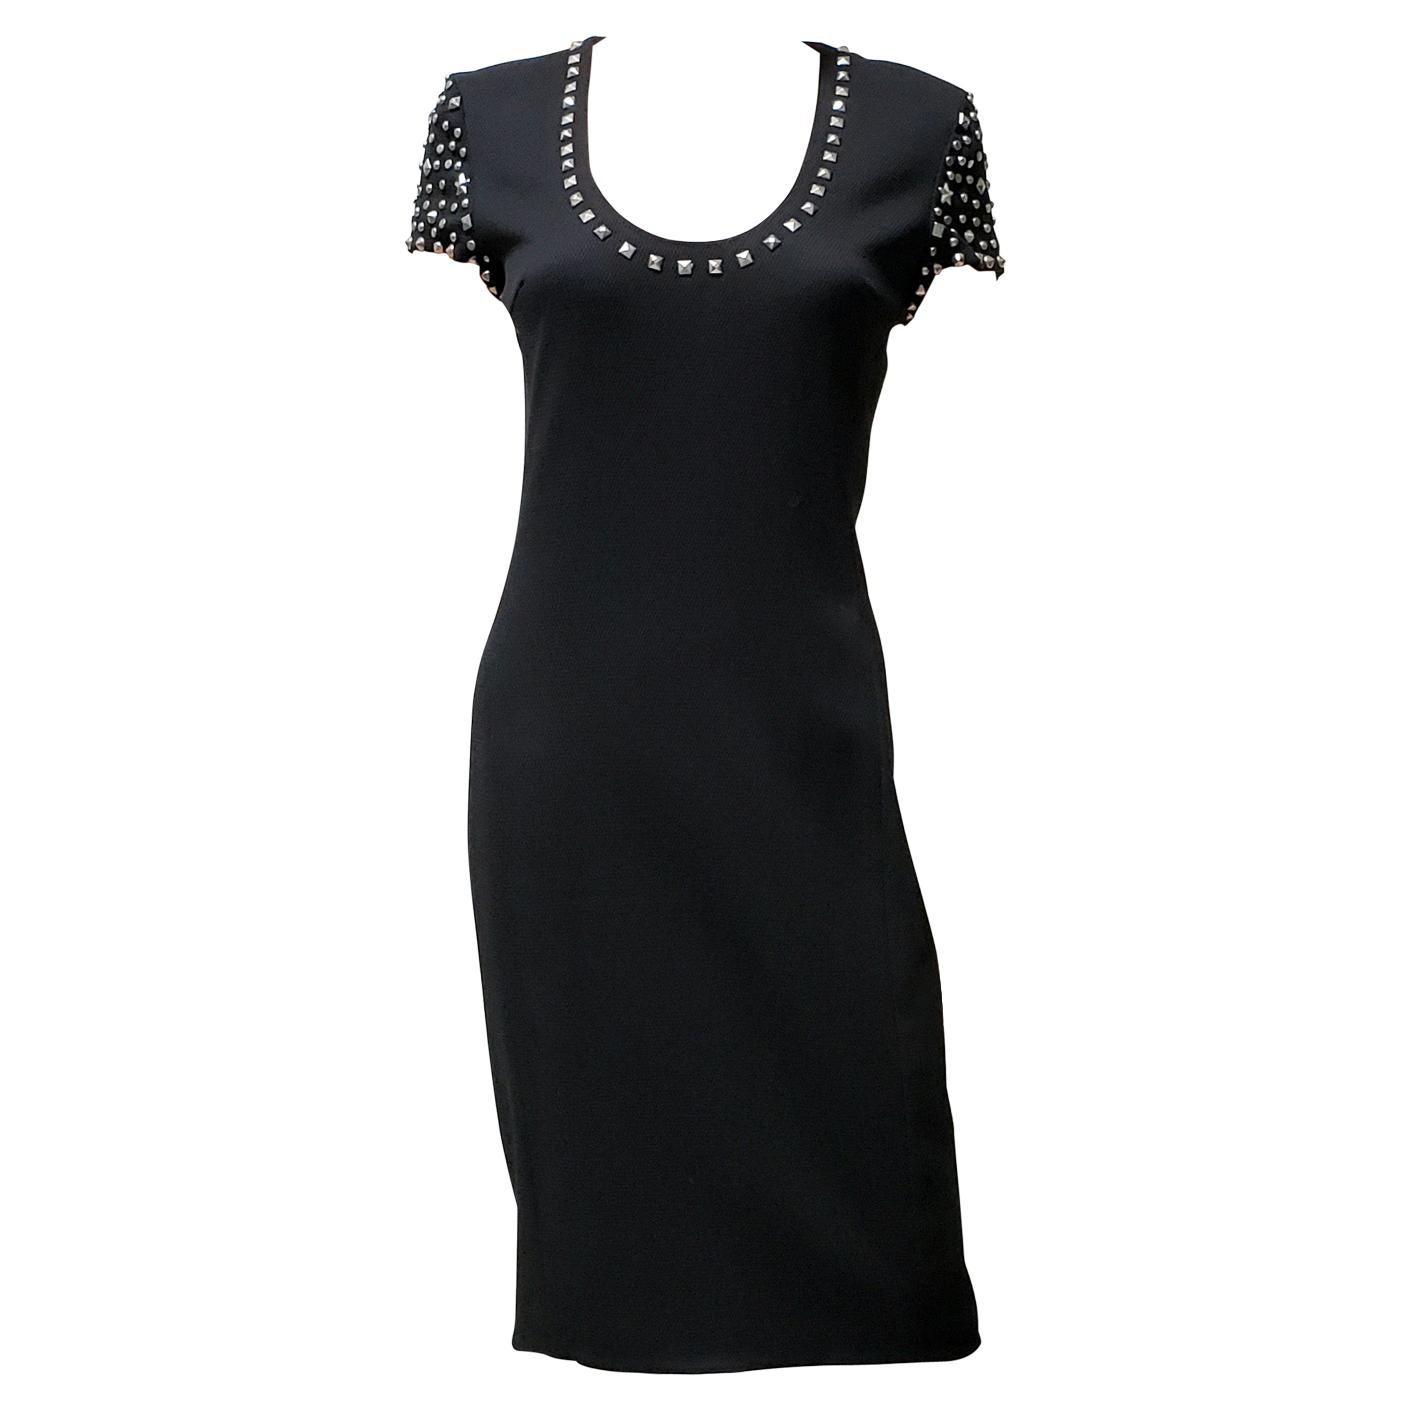 New GIANNI VERSACE COUTURE BLACK STUDDED DRESS 38 - 2, 40 - 4 For Sale